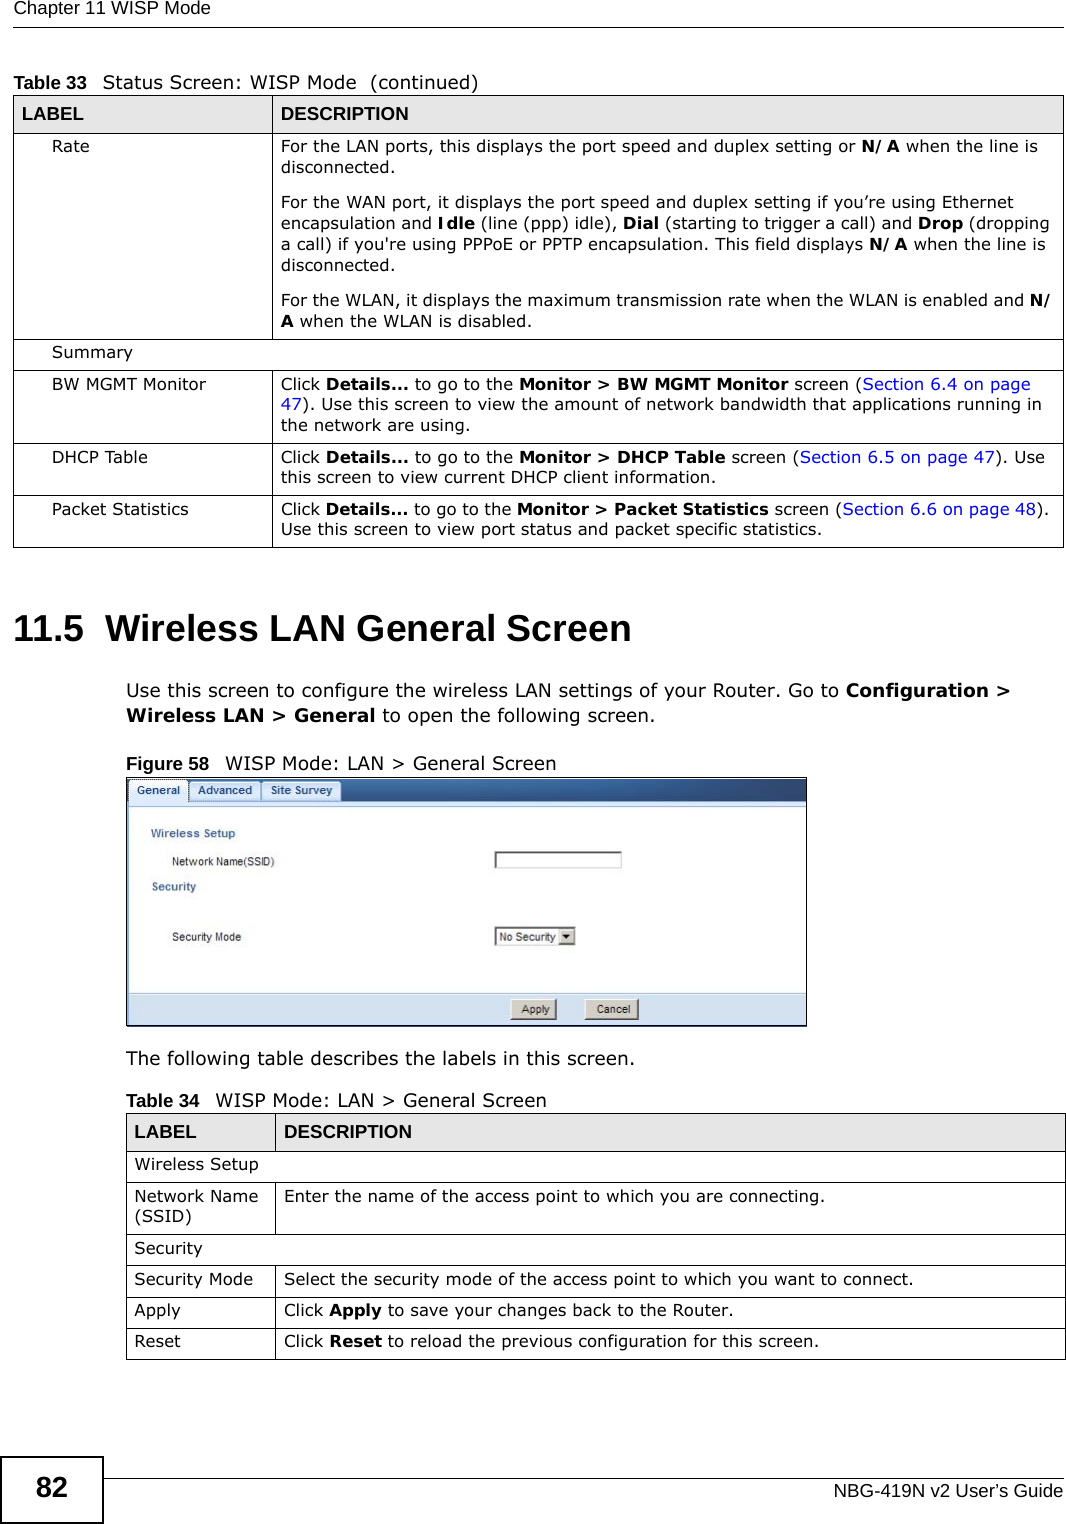 Chapter 11 WISP ModeNBG-419N v2 User’s Guide8211.5  Wireless LAN General ScreenUse this screen to configure the wireless LAN settings of your Router. Go to Configuration &gt; Wireless LAN &gt; General to open the following screen.Figure 58   WISP Mode: LAN &gt; General ScreenThe following table describes the labels in this screen. Rate For the LAN ports, this displays the port speed and duplex setting or N/A when the line is disconnected.For the WAN port, it displays the port speed and duplex setting if you’re using Ethernet encapsulation and Idle (line (ppp) idle), Dial (starting to trigger a call) and Drop (dropping a call) if you&apos;re using PPPoE or PPTP encapsulation. This field displays N/A when the line is disconnected.For the WLAN, it displays the maximum transmission rate when the WLAN is enabled and N/A when the WLAN is disabled.SummaryBW MGMT Monitor  Click Details... to go to the Monitor &gt; BW MGMT Monitor screen (Section 6.4 on page 47). Use this screen to view the amount of network bandwidth that applications running in the network are using.DHCP Table Click Details... to go to the Monitor &gt; DHCP Table screen (Section 6.5 on page 47). Use this screen to view current DHCP client information.Packet Statistics Click Details... to go to the Monitor &gt; Packet Statistics screen (Section 6.6 on page 48). Use this screen to view port status and packet specific statistics.Table 33   Status Screen: WISP Mode  (continued)LABEL DESCRIPTIONTable 34   WISP Mode: LAN &gt; General ScreenLABEL  DESCRIPTIONWireless SetupNetwork Name (SSID)Enter the name of the access point to which you are connecting.SecuritySecurity Mode Select the security mode of the access point to which you want to connect.Apply Click Apply to save your changes back to the Router.Reset Click Reset to reload the previous configuration for this screen.